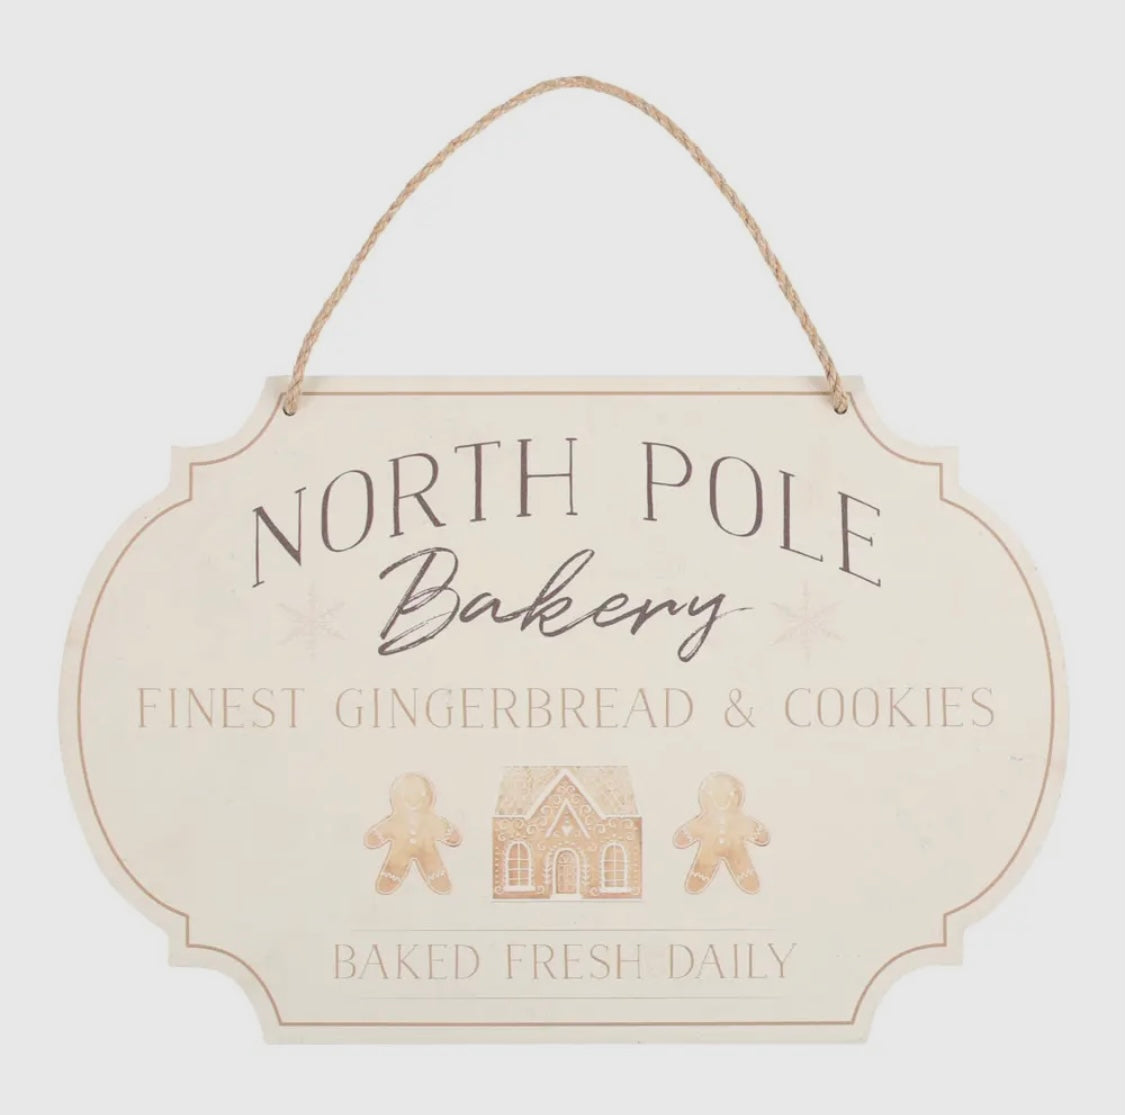 North Pole Gingerbread Bakery Wooden Hanging Sign